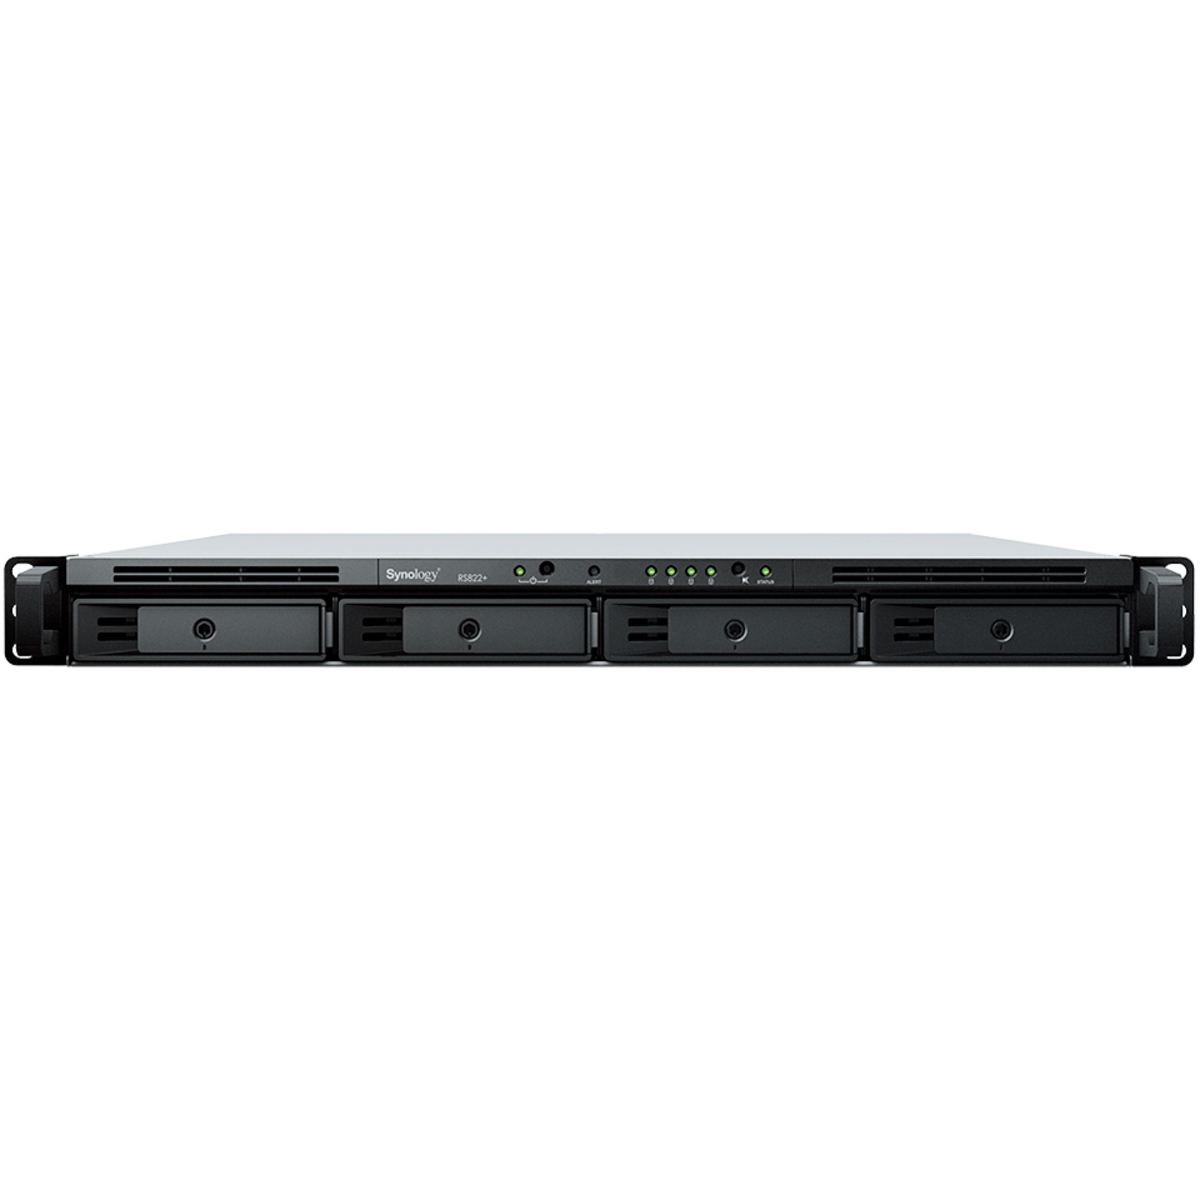 Synology RackStation RS822RP+ 72tb 4-Bay RackMount Multimedia / Power User / Business NAS - Network Attached Storage Device 3x24tb Seagate IronWolf Pro ST24000NT002 3.5 7200rpm SATA 6Gb/s HDD NAS Class Drives Installed - Burn-In Tested - FREE RAM UPGRADE RackStation RS822RP+